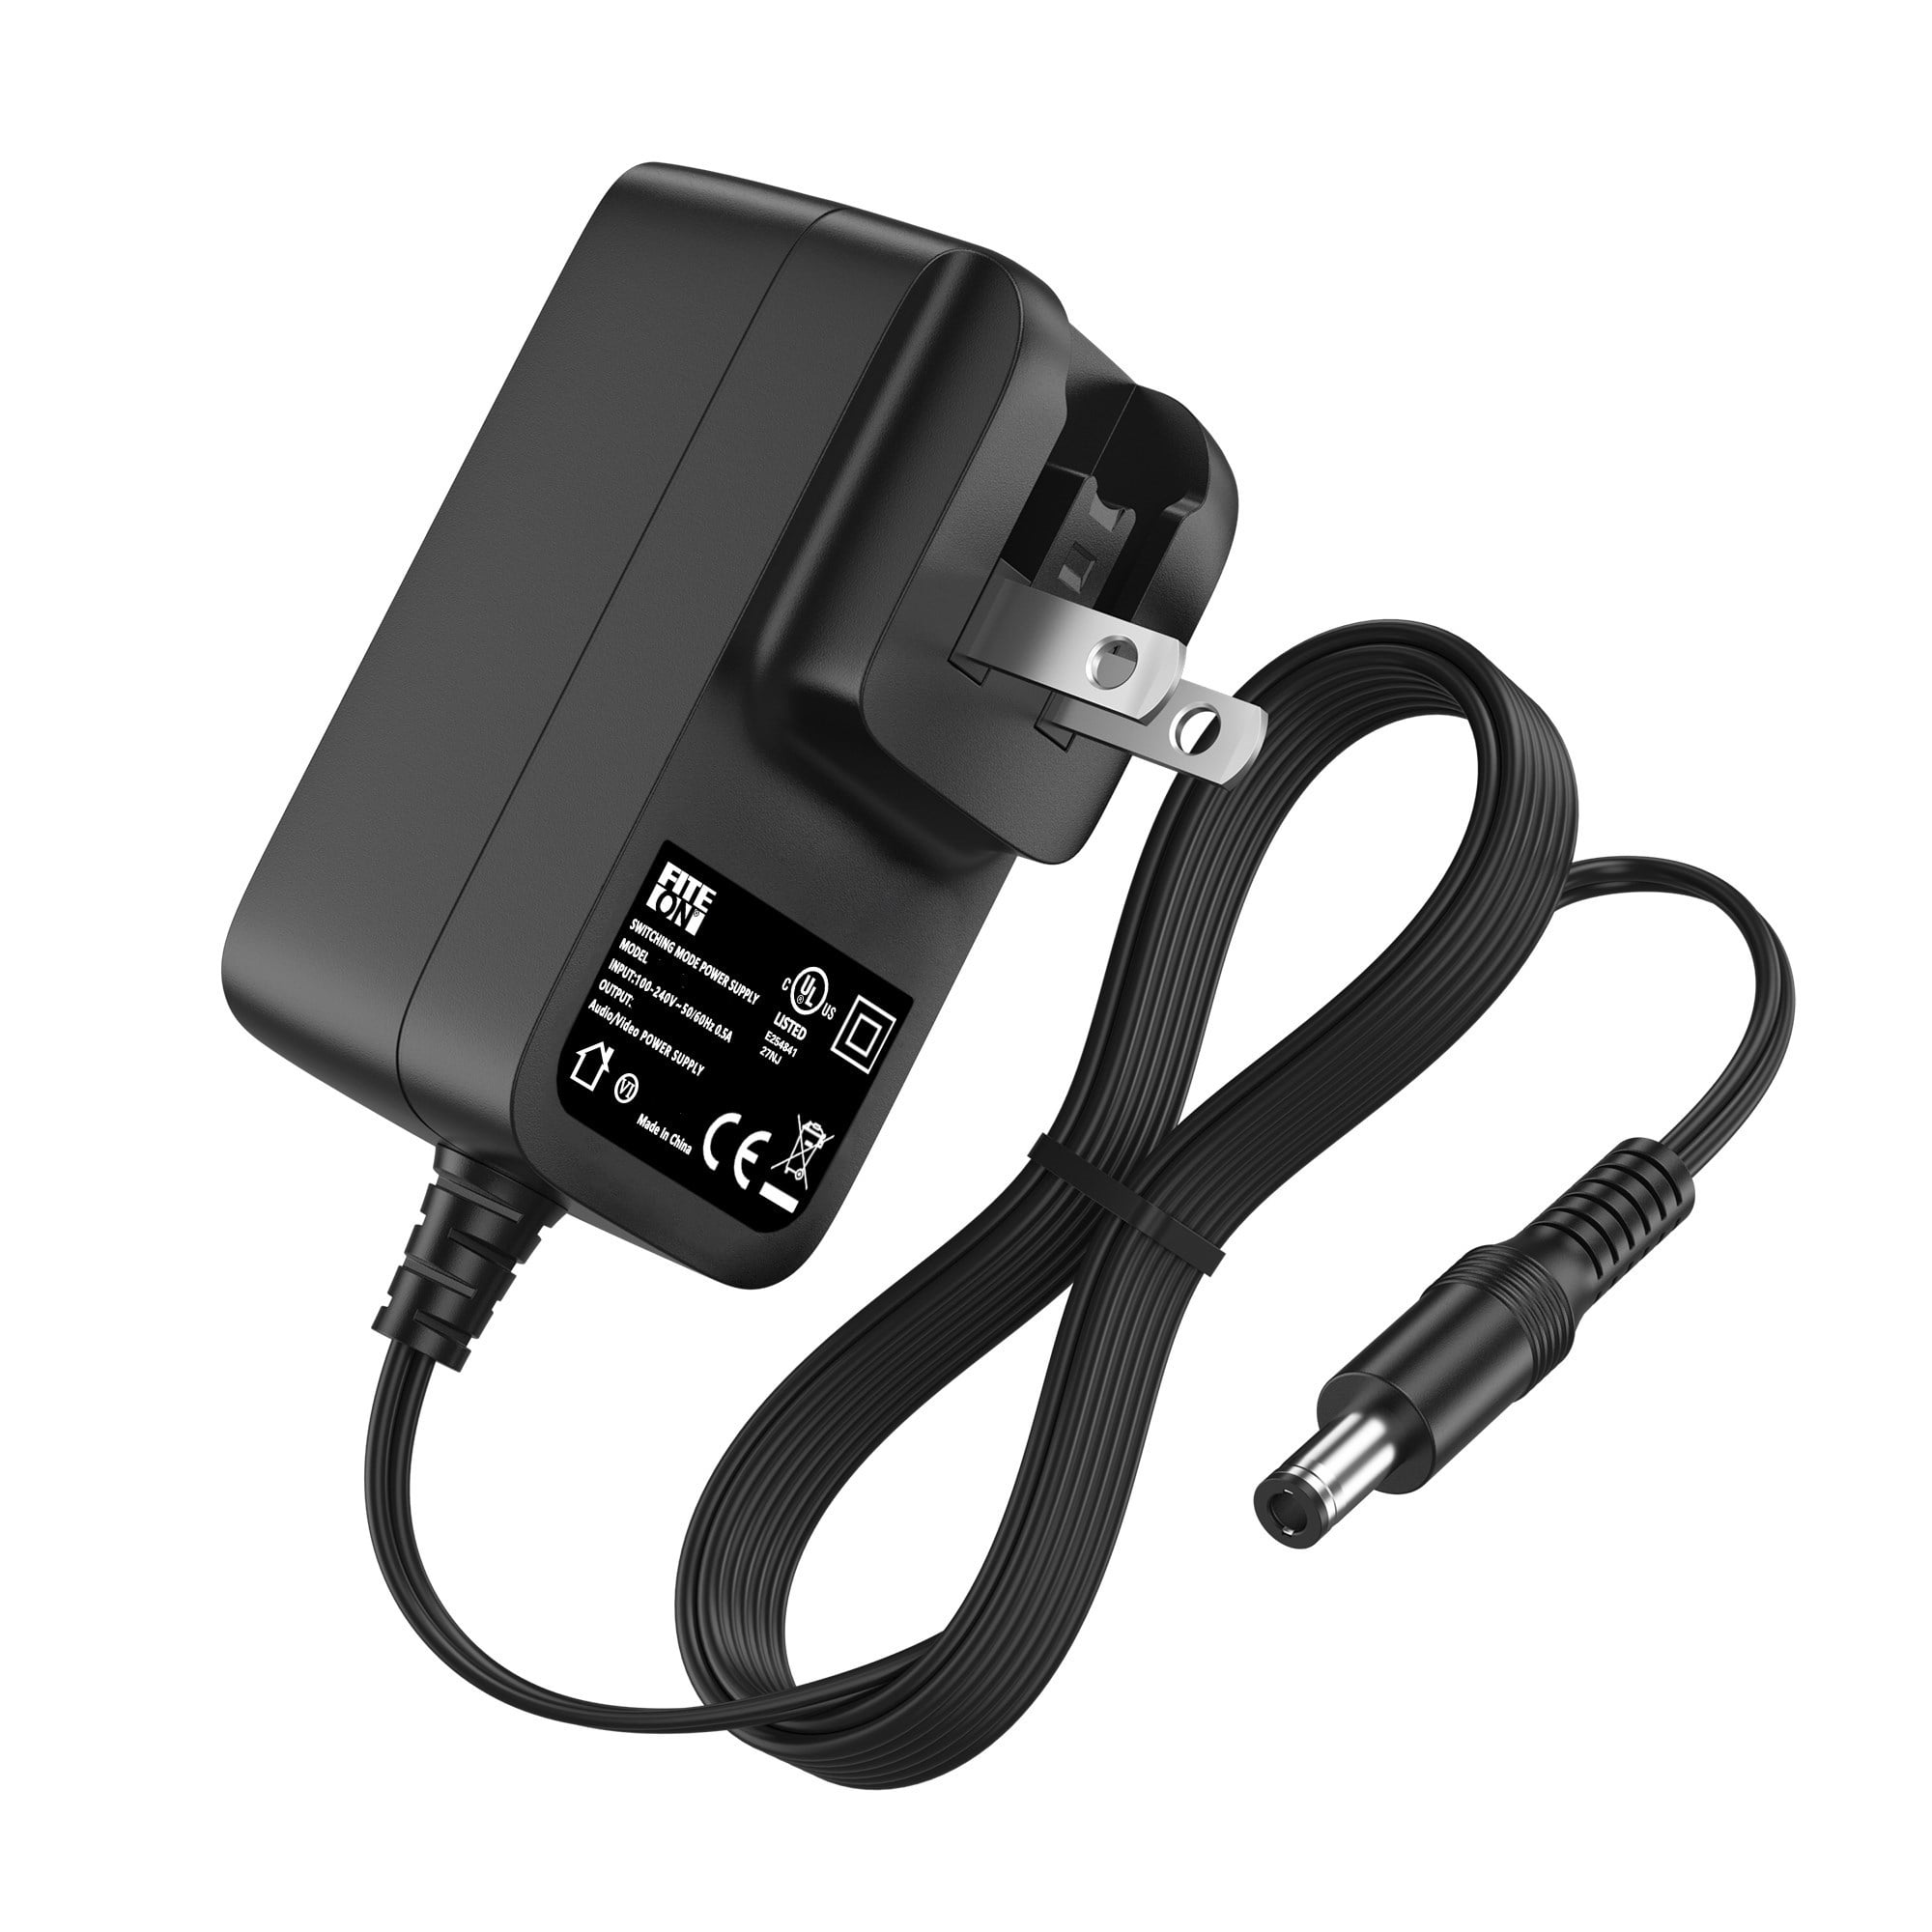 UpBright New Global 9V AC/DC Adapter for Dymo LabelManager 450D Label Manager 450 D Label Printer 9VDC 2A Power Supply Cord Cable PS Wall Home Charger Mains PSU 